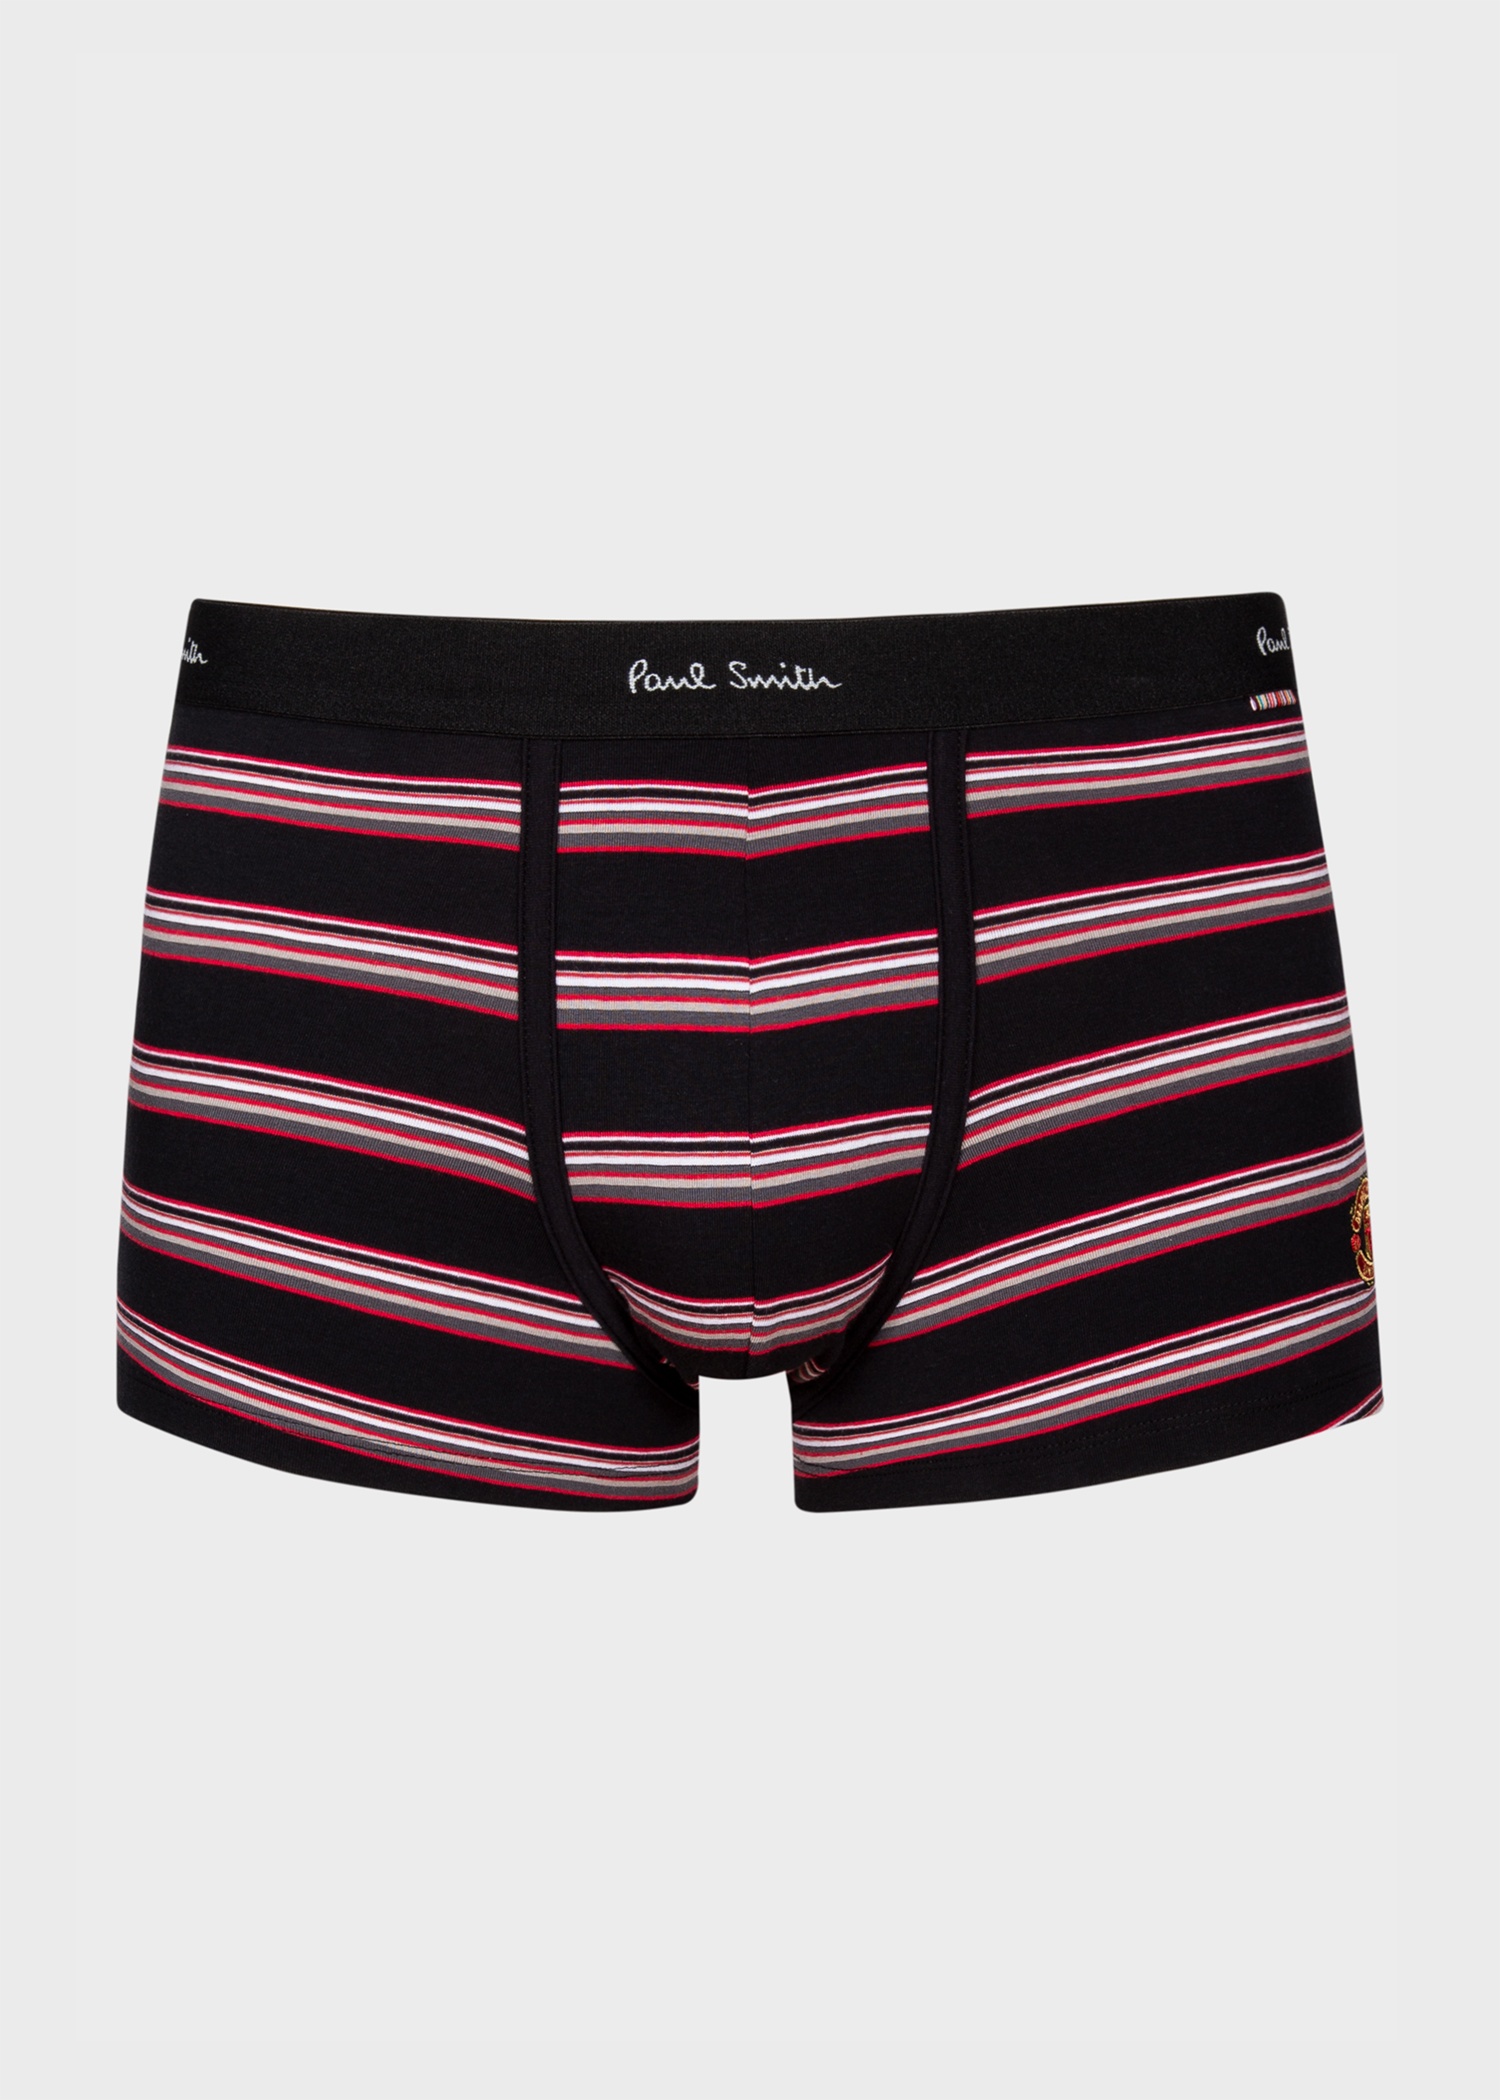 Paul Smith & Manchester United - Low-Rise Boxer Briefs - 1